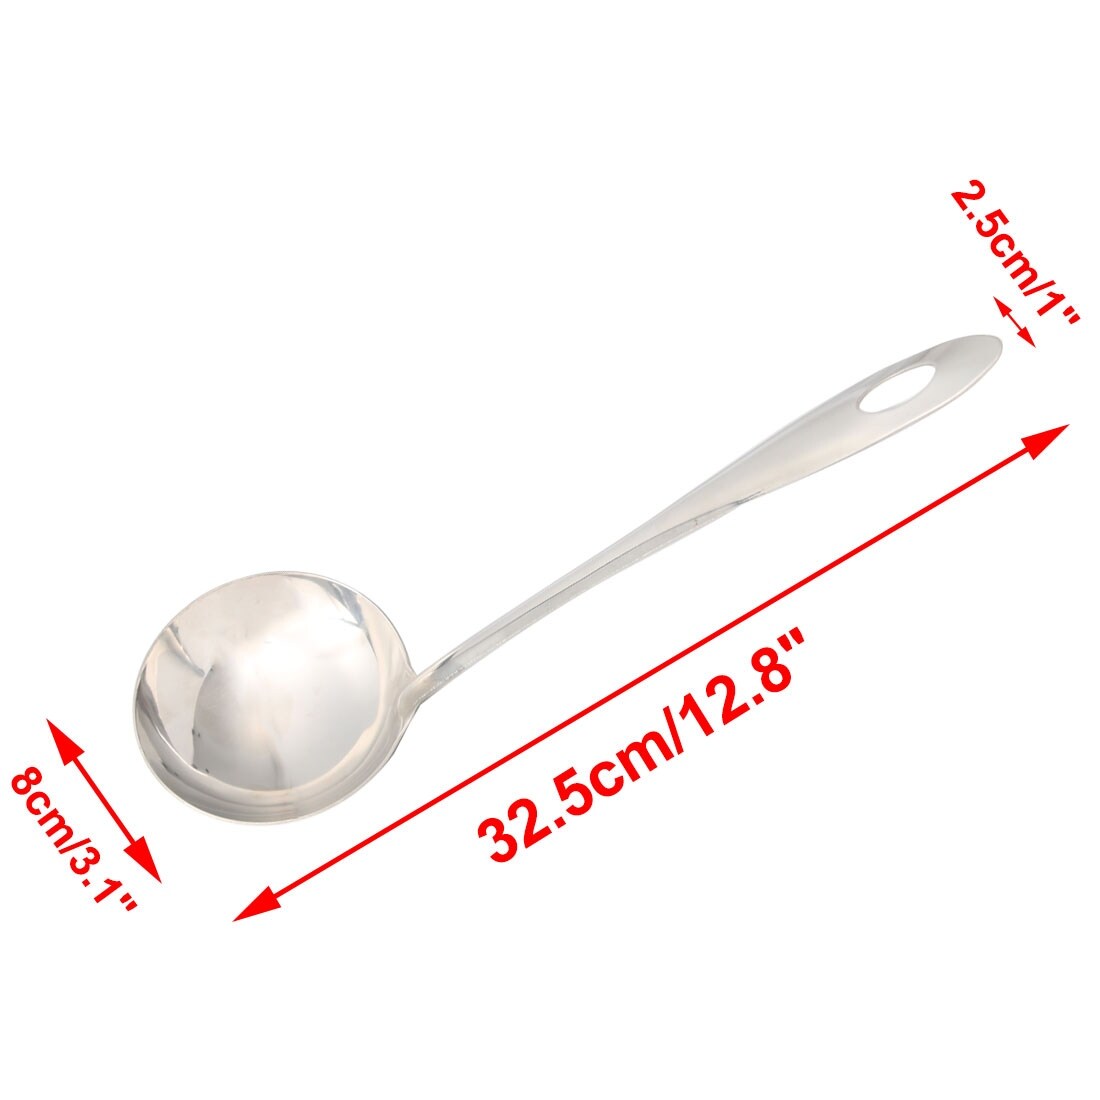 https://ak1.ostkcdn.com/images/products/is/images/direct/879fcc0aa47020ff2d1af61d2dce24fc77974650/Stainless-Steel-Long-Handle-Soup-Ladle-Chef-Cooking-12.8%22-Silver-Tone-2pcs.jpg